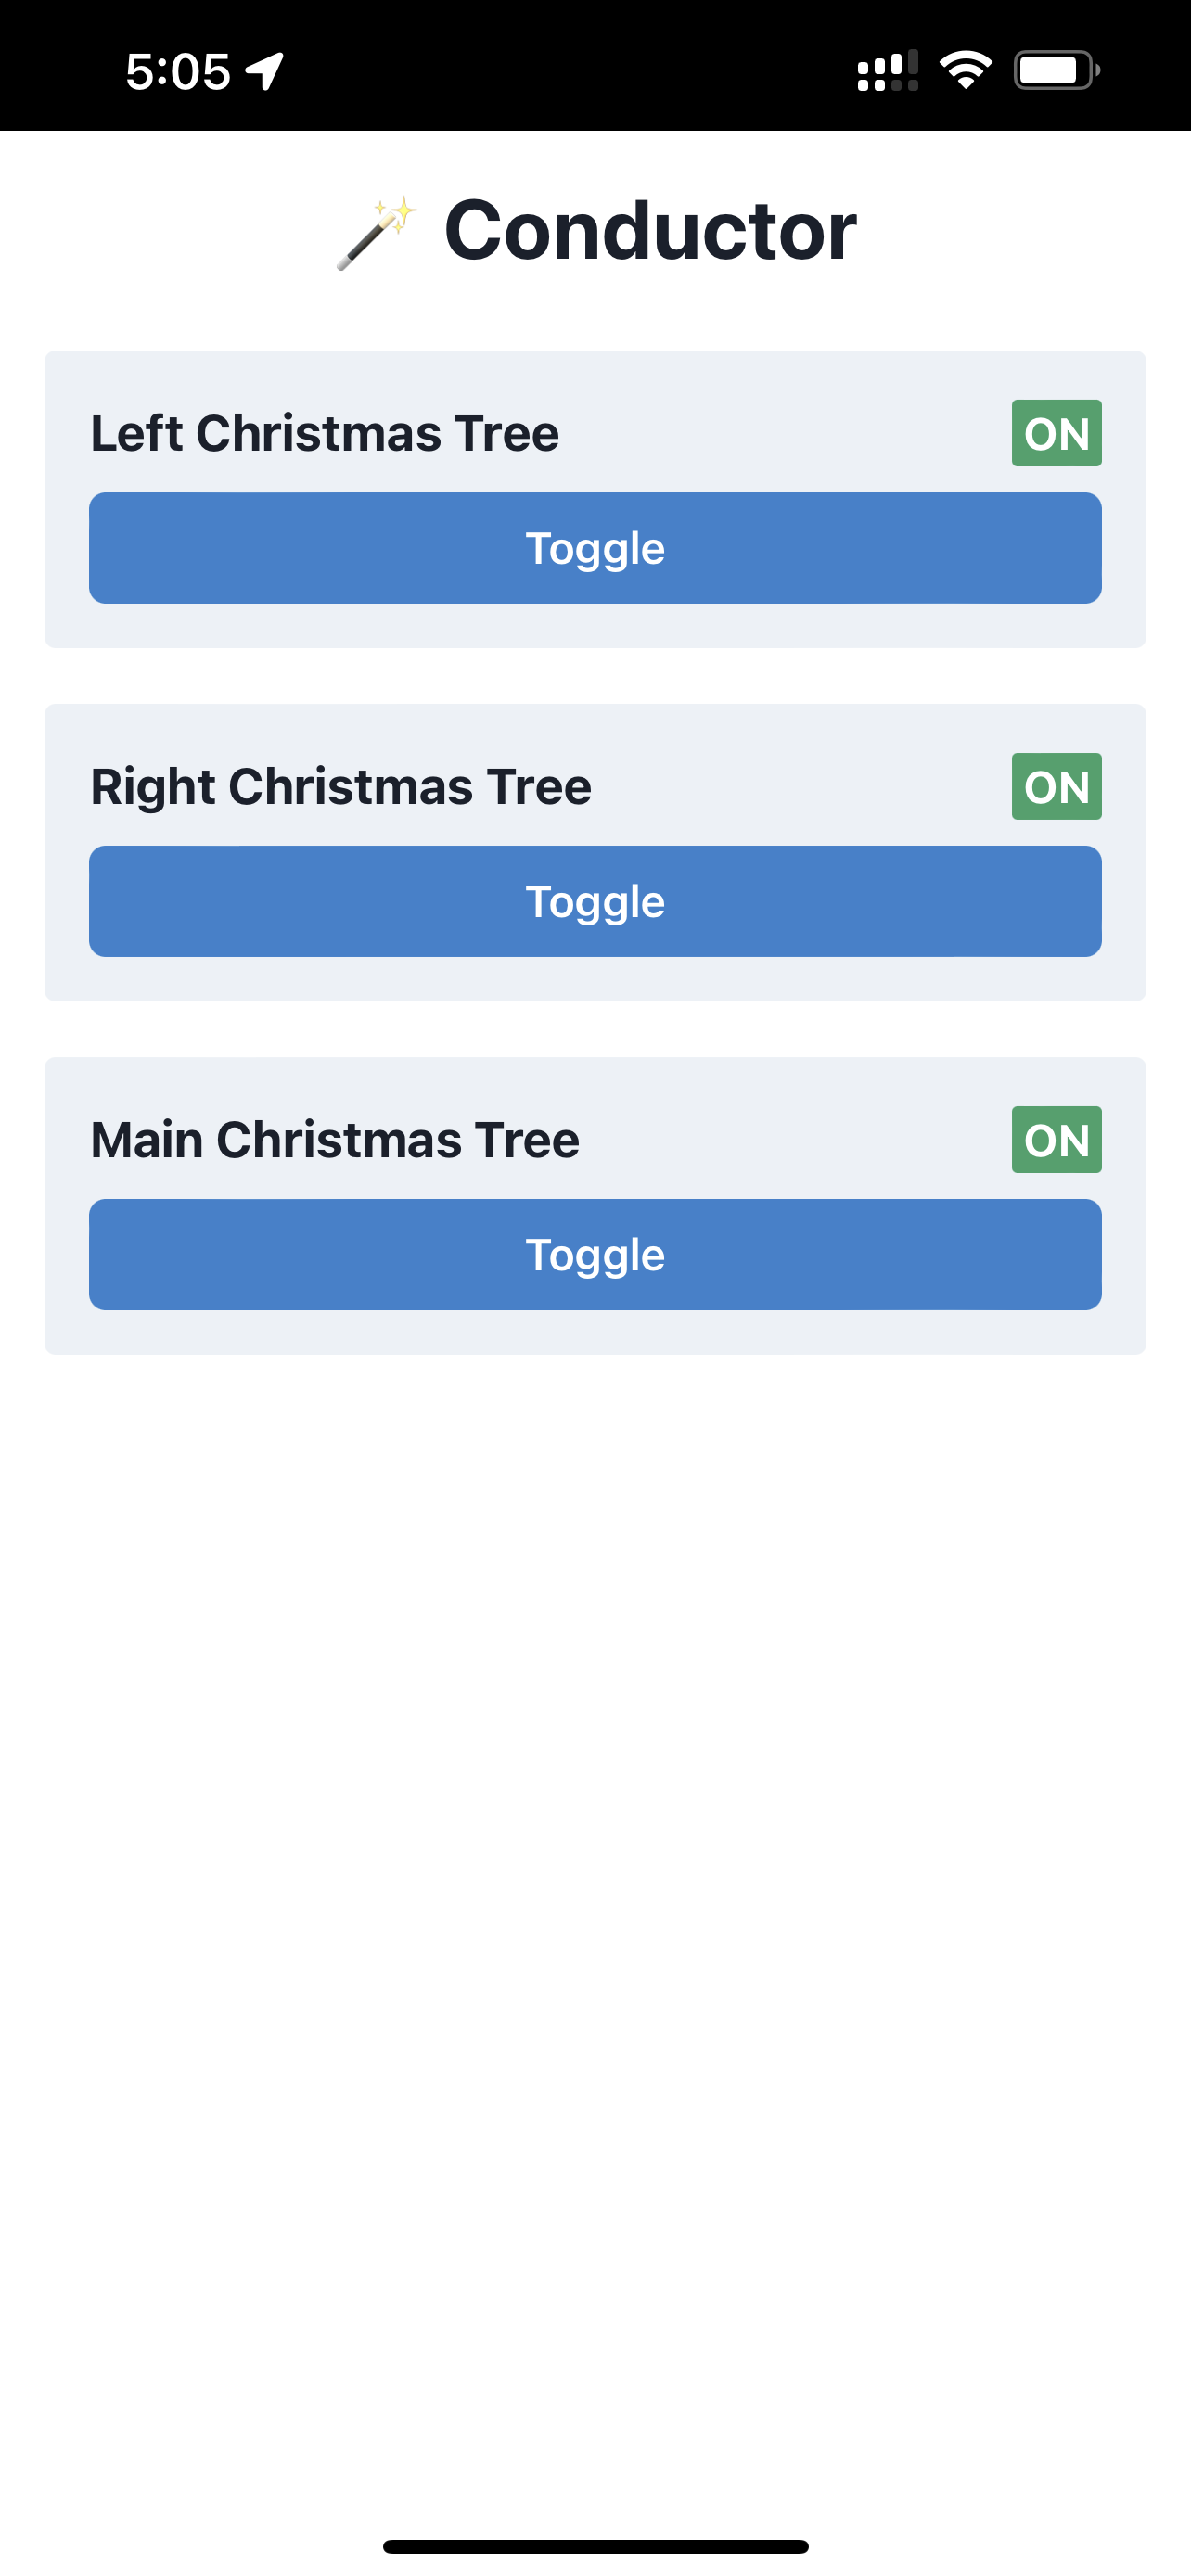 A screenshot from a mobile device showing the interface of Wemo Conductor. Three Christmas trees are on.